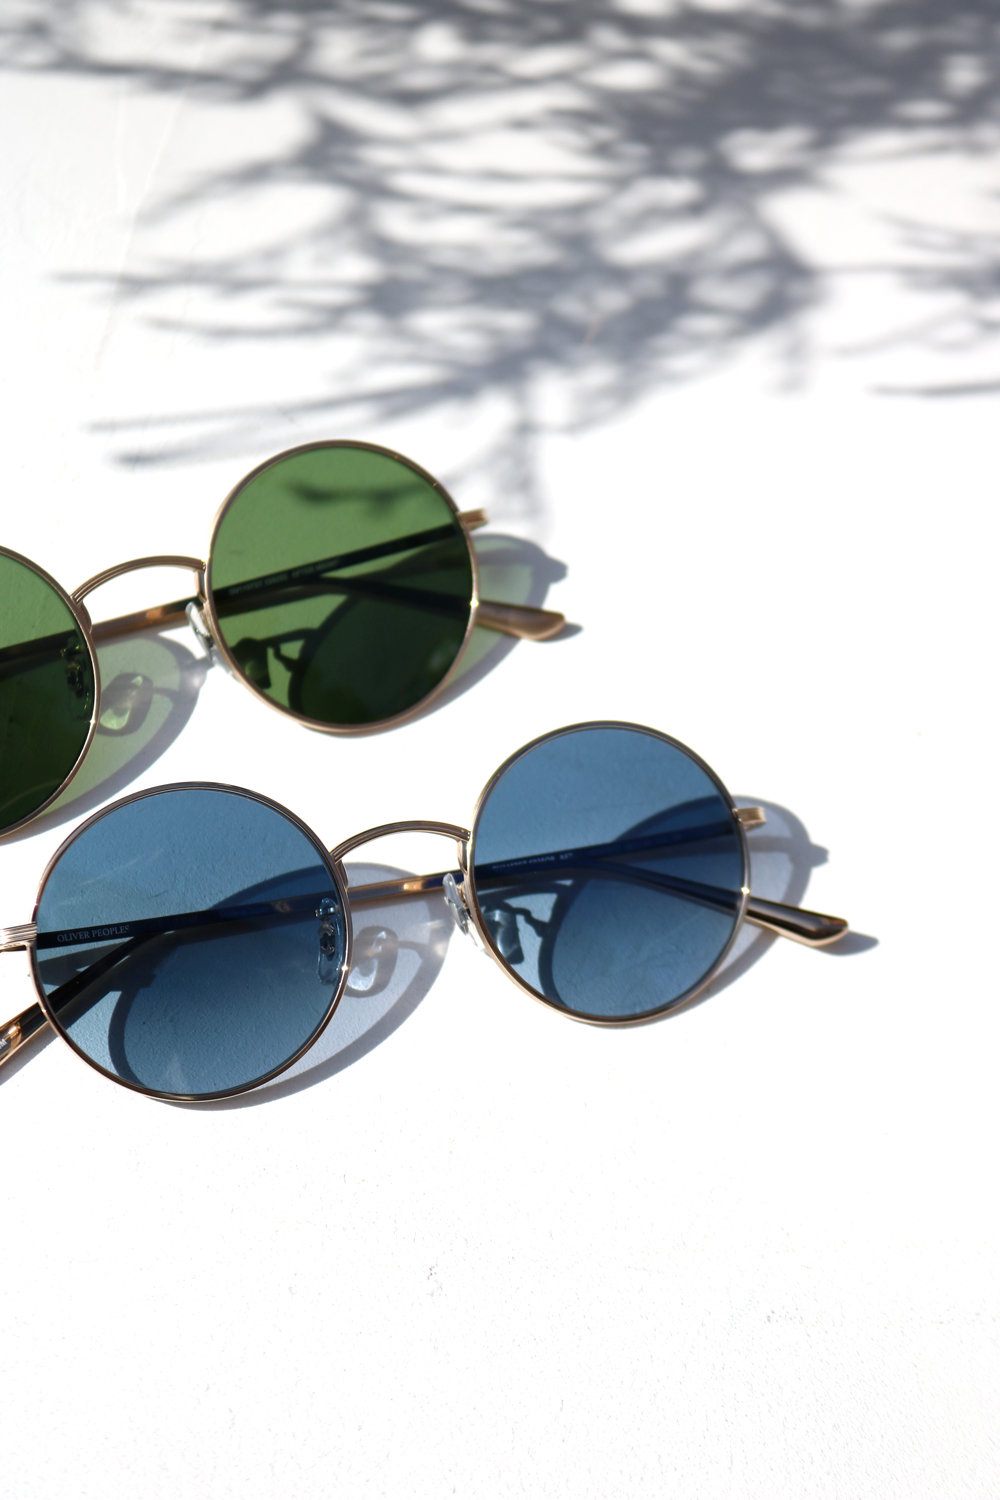 OLIVER PEOPLES オリバーピープルズ THE ROW サングラス-